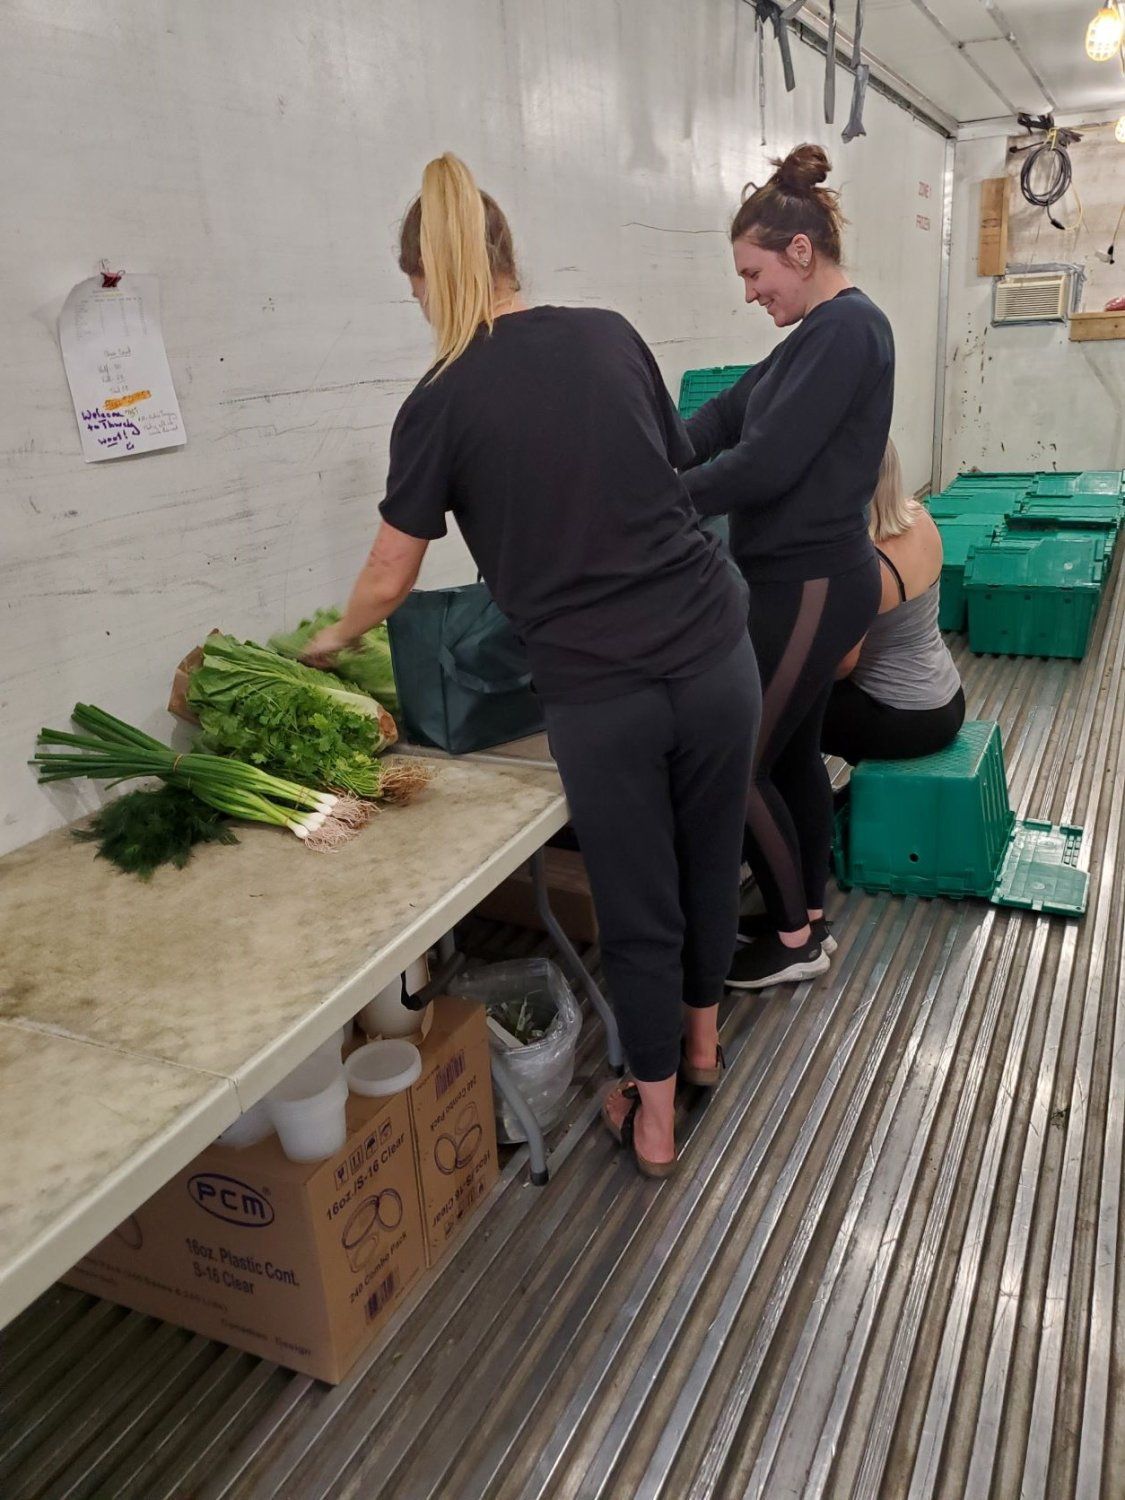 Previous Happening: Farm Happenings for August 2, 2022 - Introducing the Packing Crew